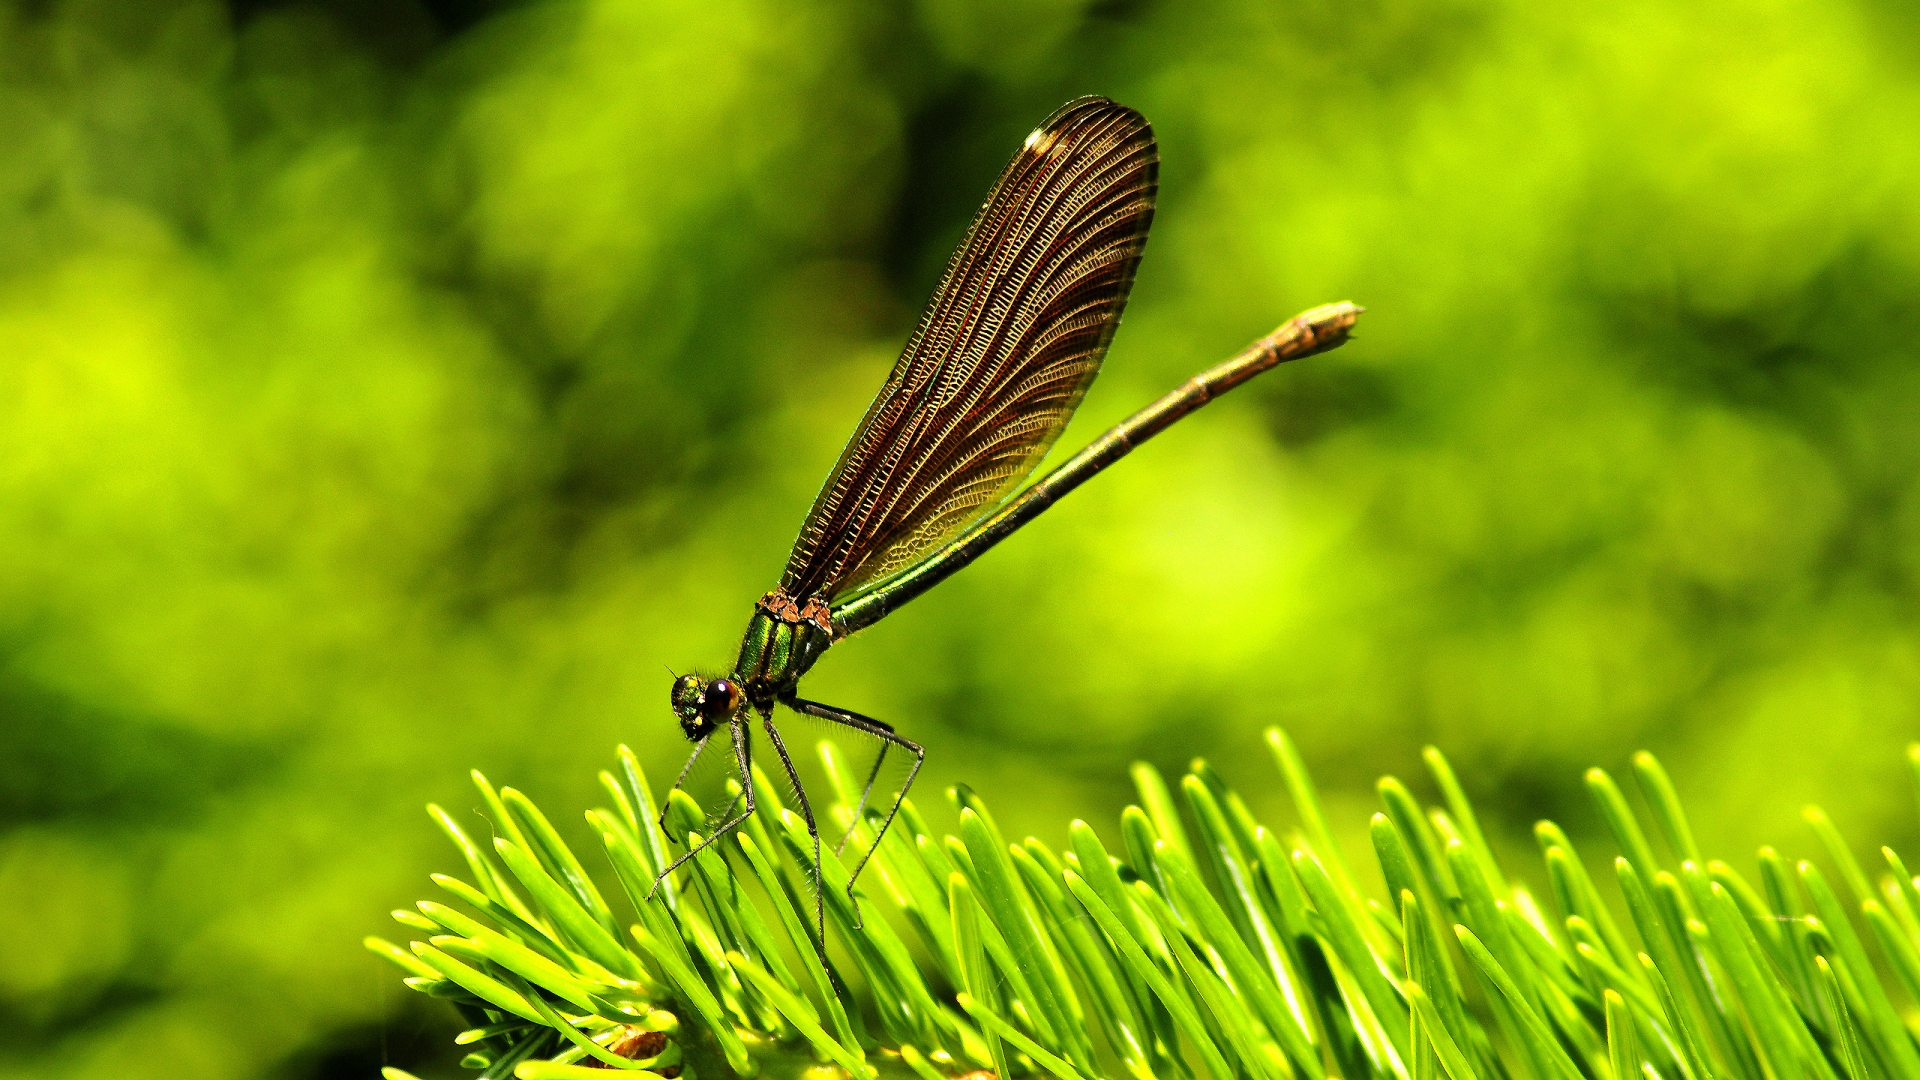 Amazing Dragon Fly for 1920 x 1080 HDTV 1080p resolution